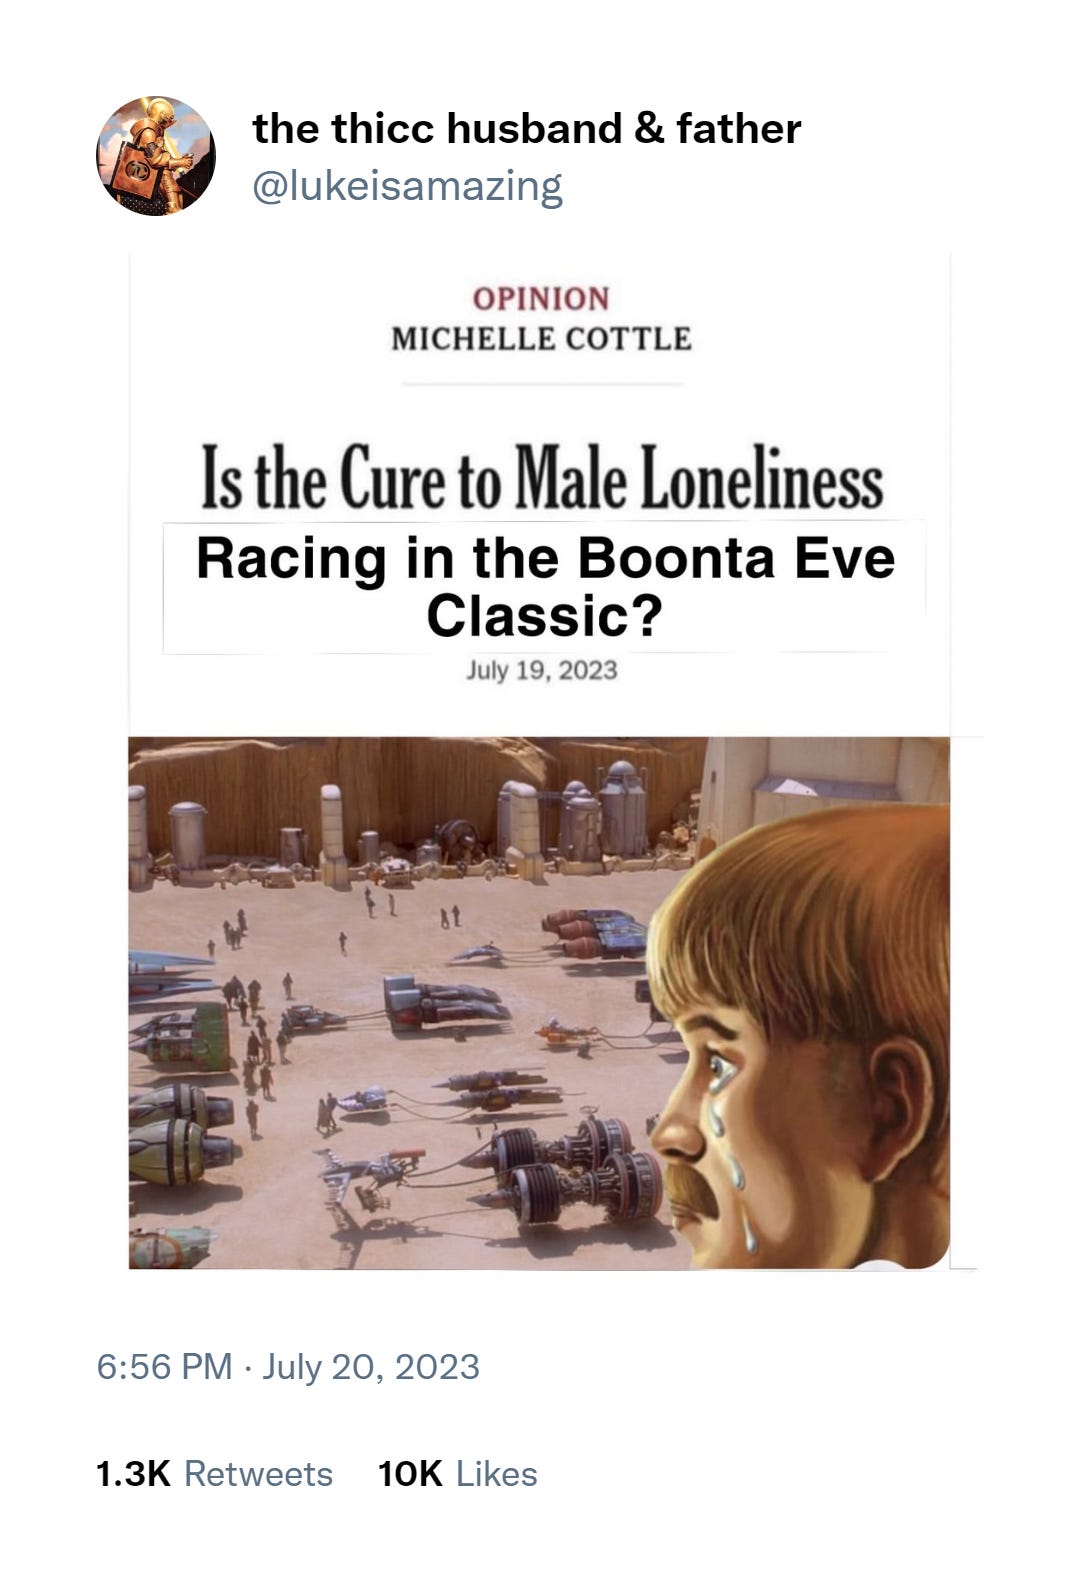 Tweet: "Is the Cure to Male Loneliness Racing in the Boonta Eve Classic?" Photoshopped image of male crying in front of podracing scene from Star Wars Episode One.